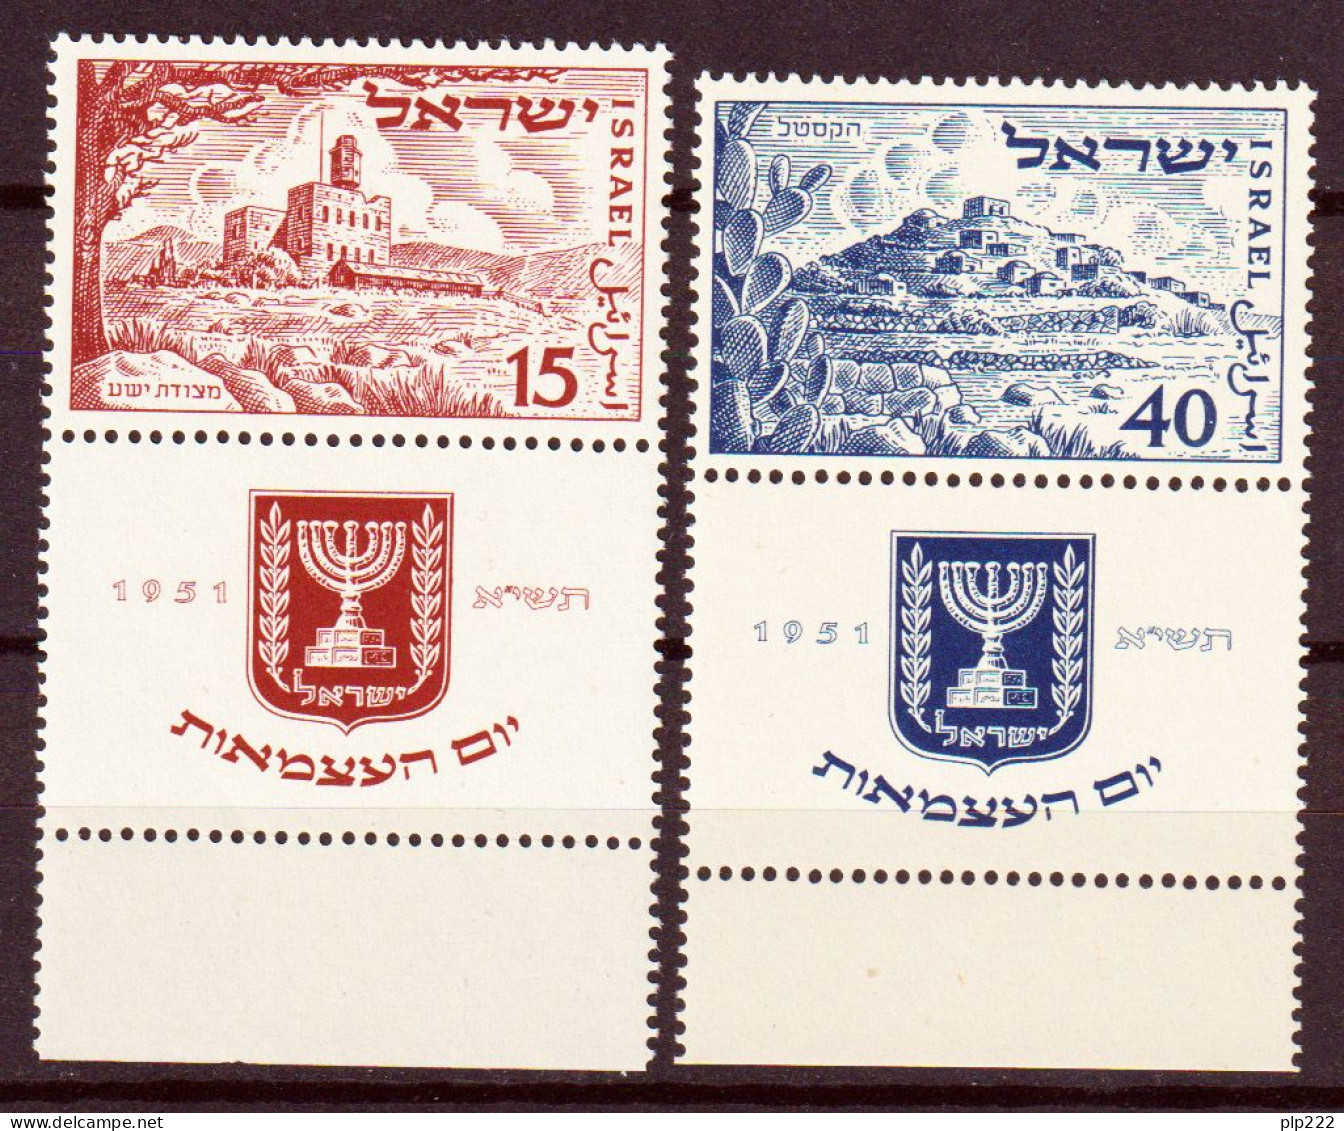 Israele 1951 Y.T.43/44 Con Appendice / With Tab**/MNH VF - Neufs (avec Tabs)